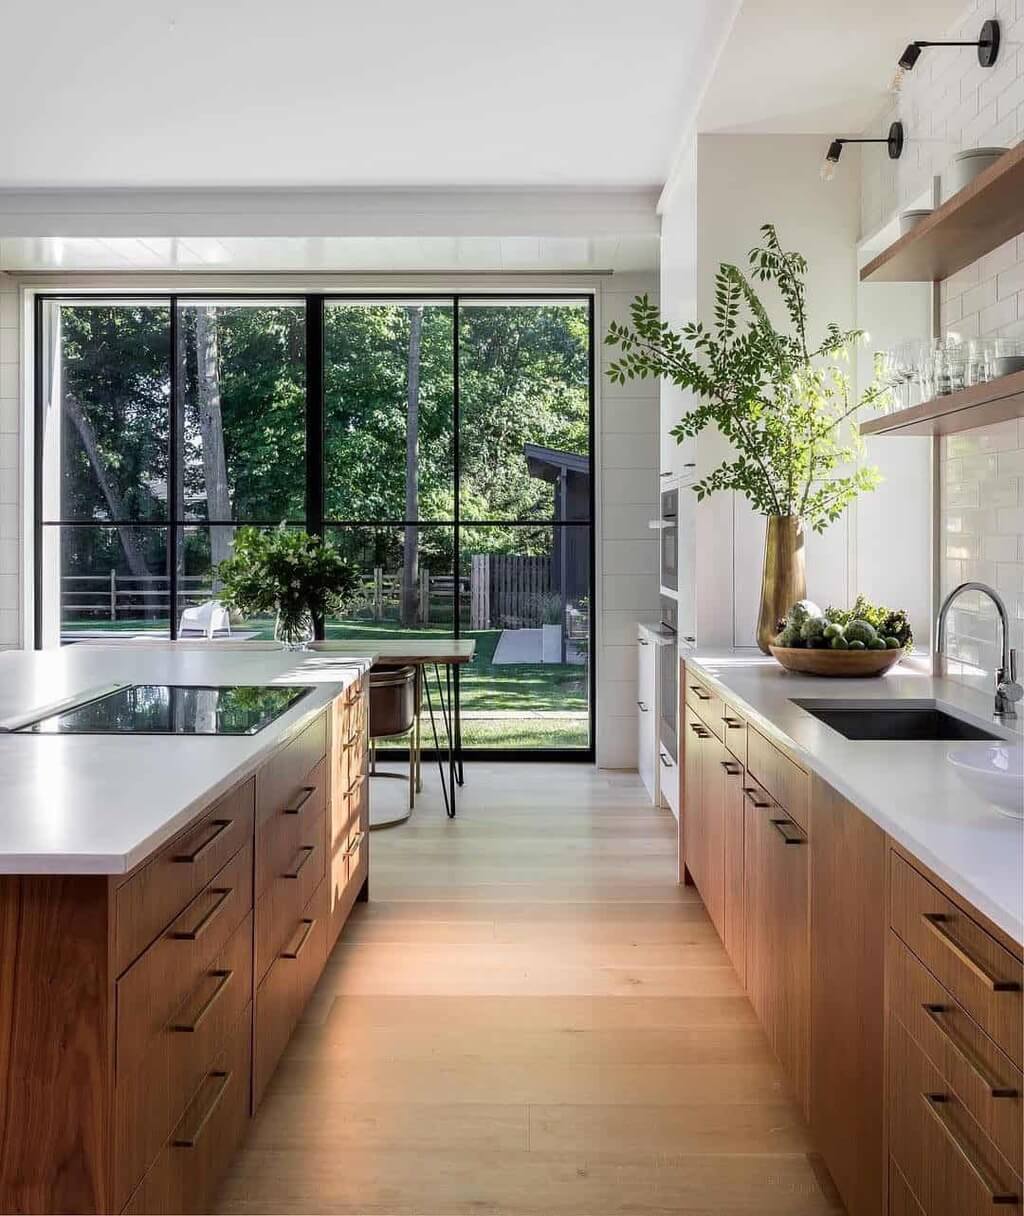 A modern kitchen with large windows and wooden cabinets.